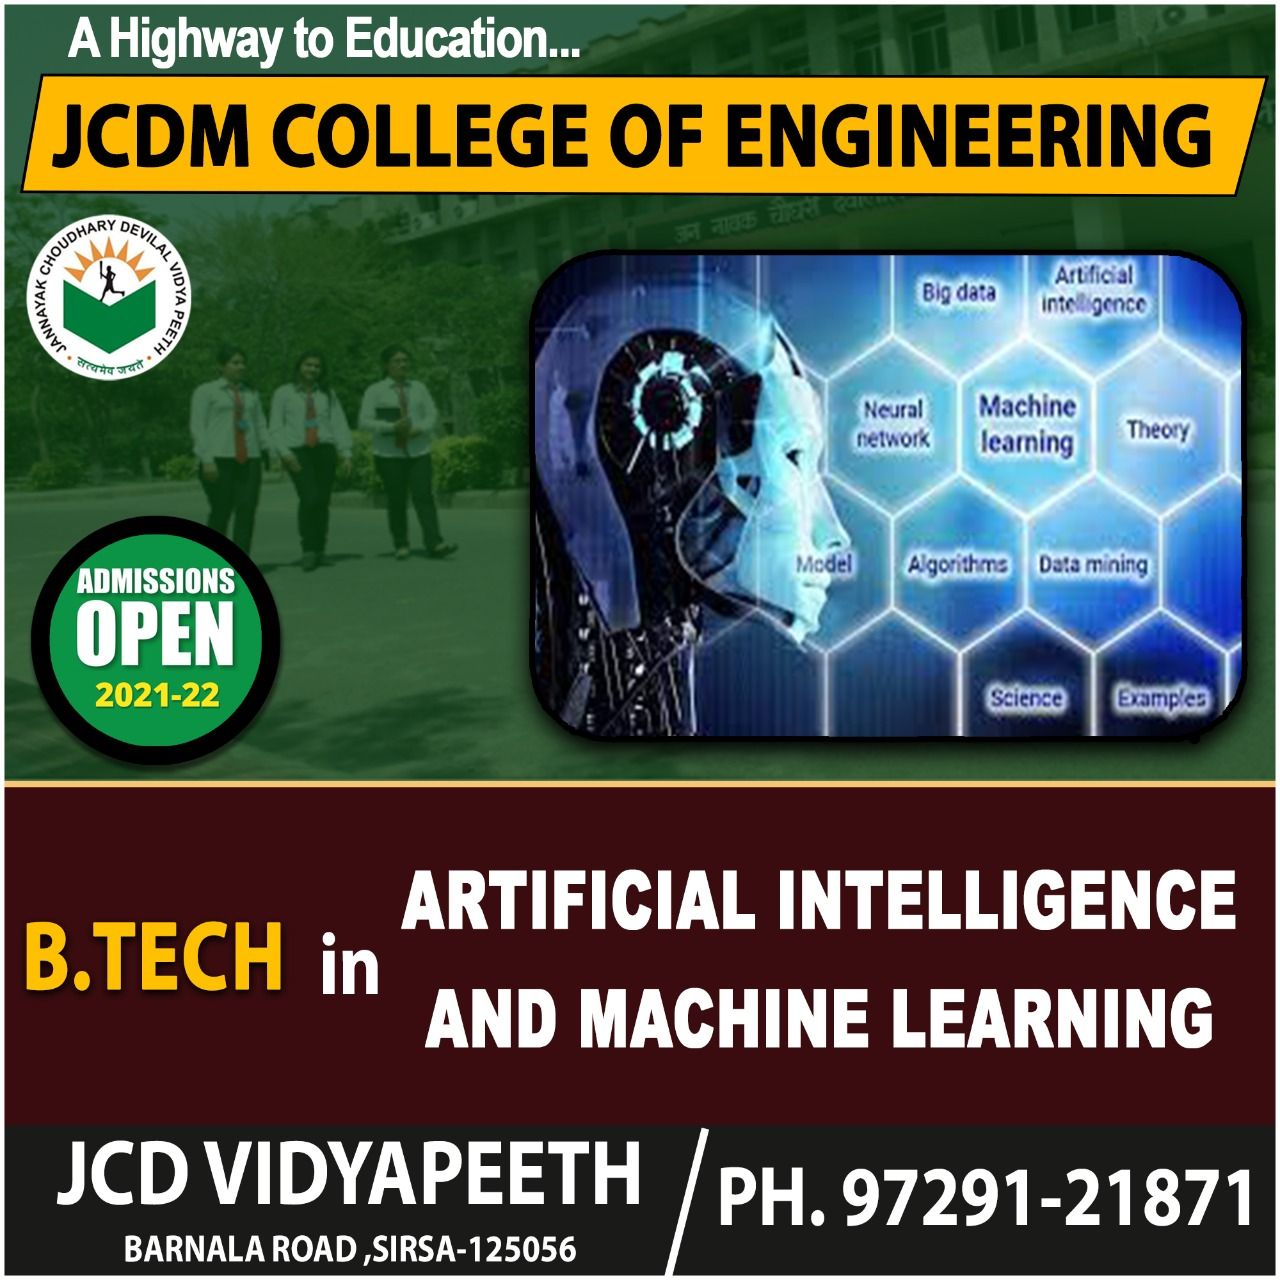 Artificial Intelligence and Machine Learning Course approval by AICTE, New Delhi